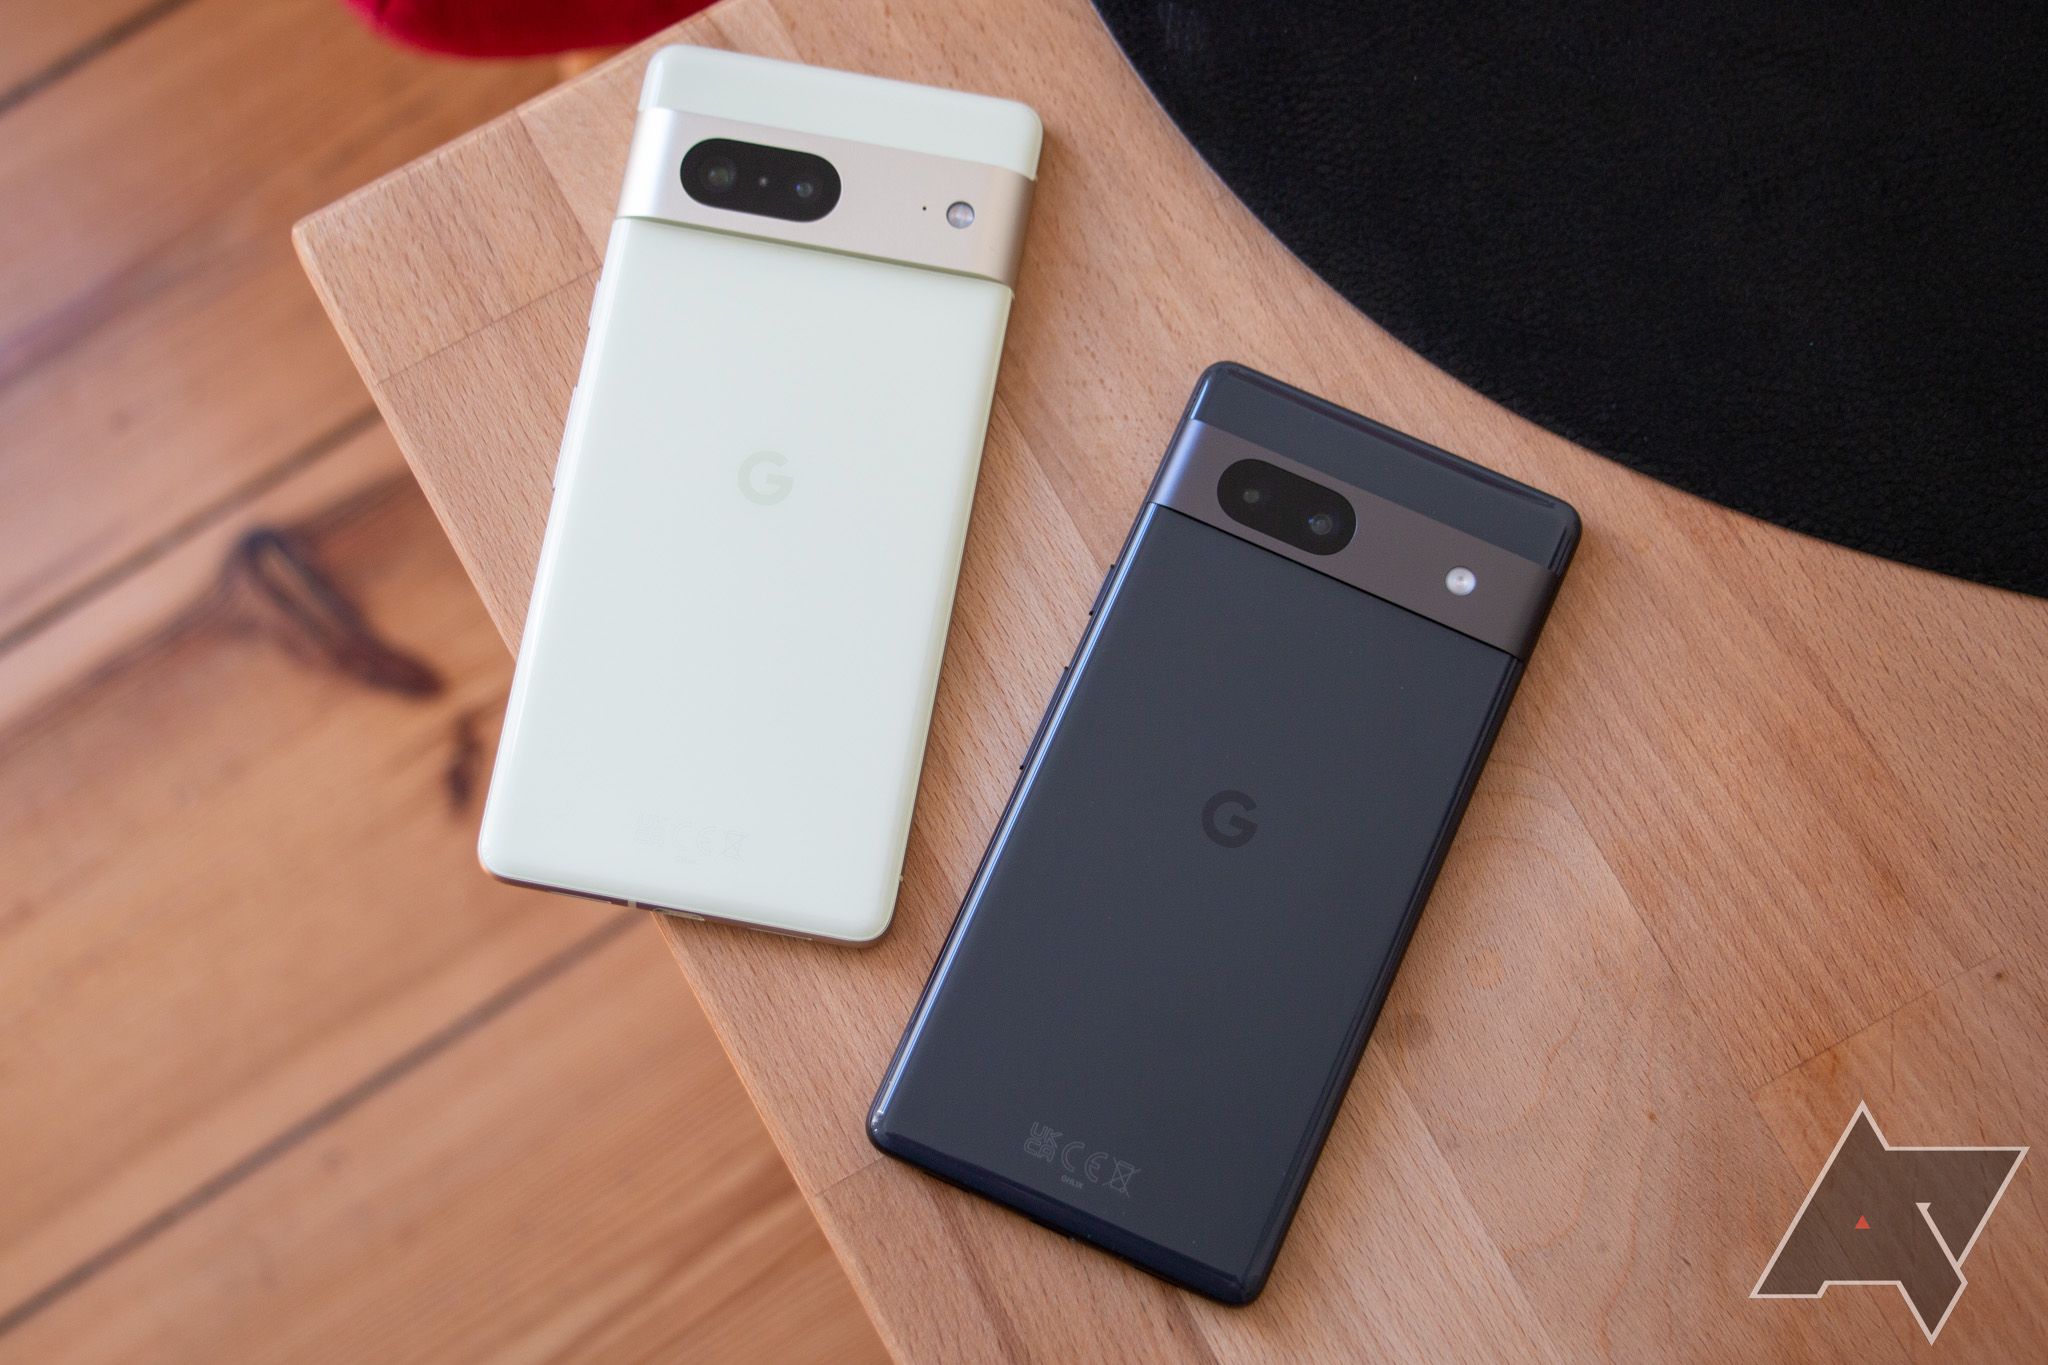 The Pixel 7a next to the Pixel 7 on a wooden table.